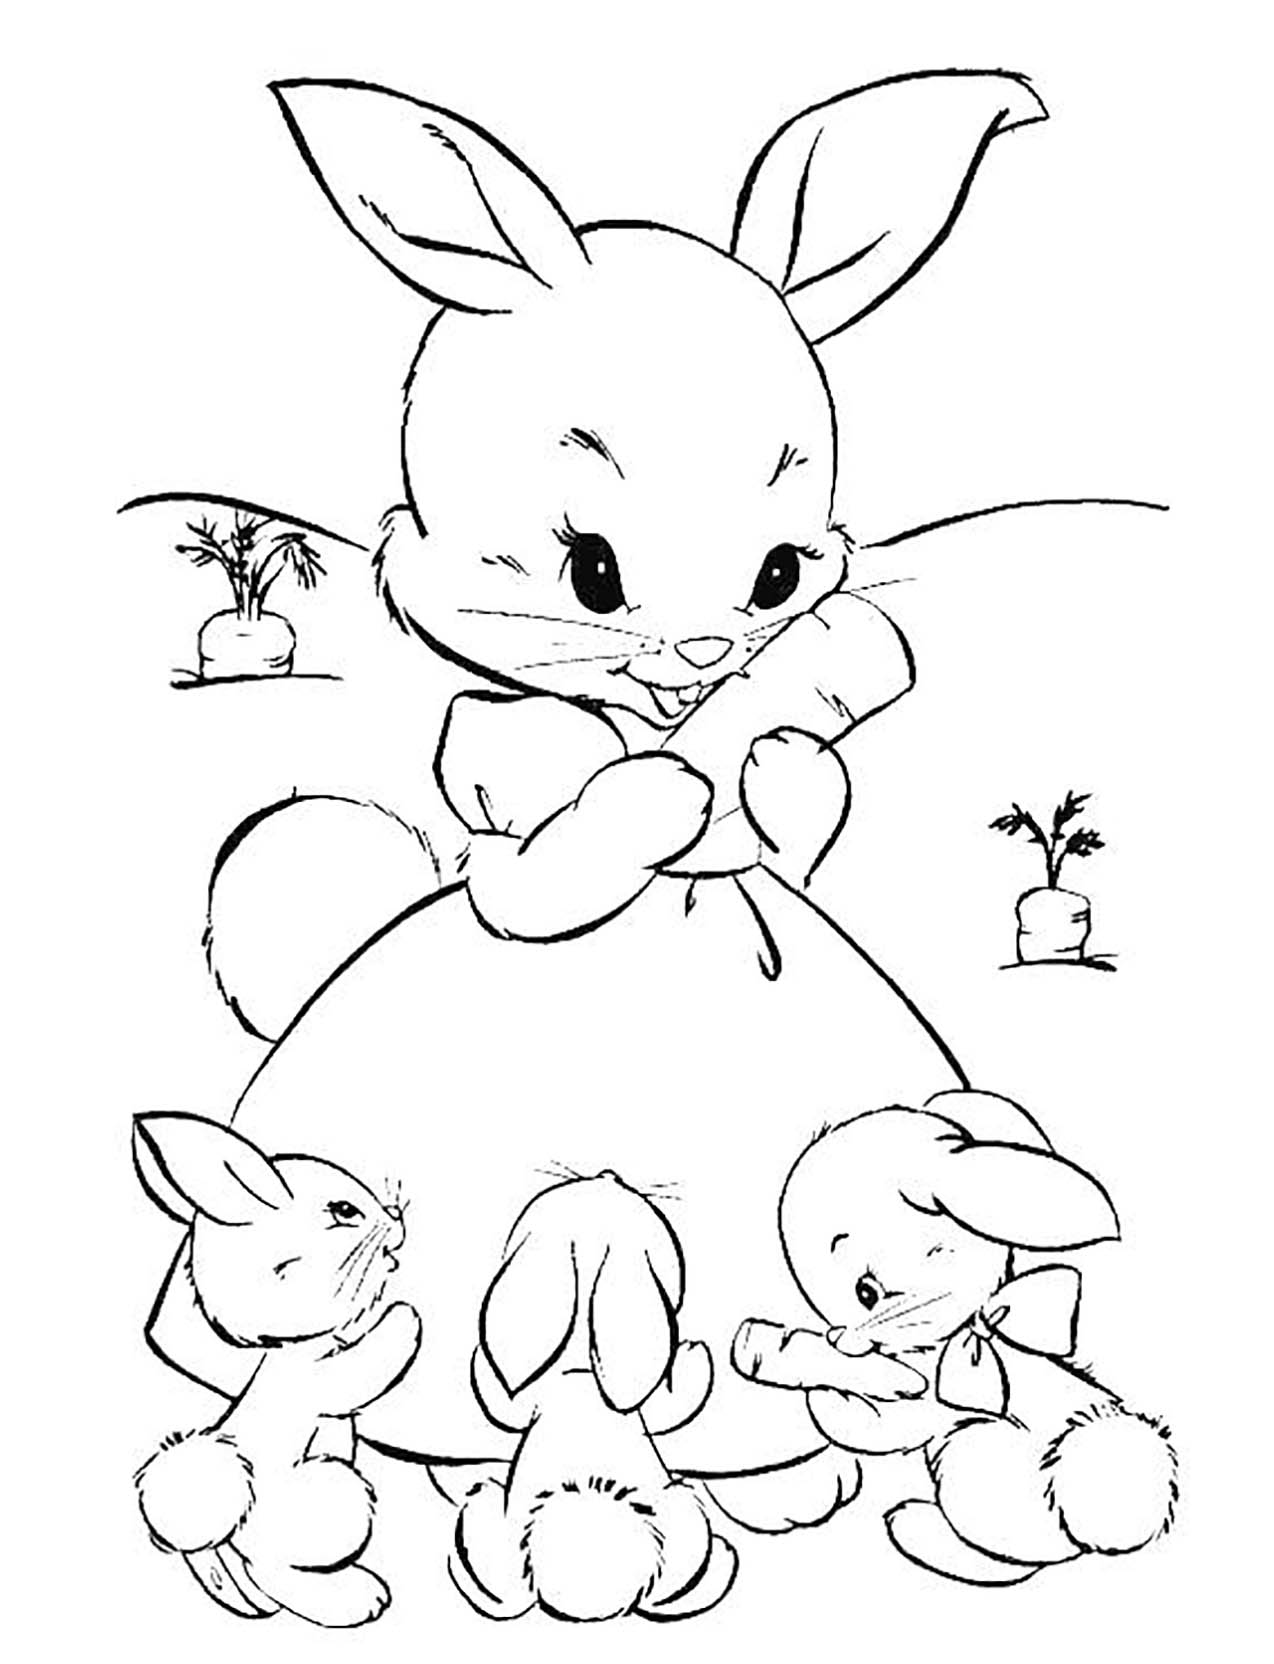 Free rabbit drawing to print and color - Rabbits & Bunnies Kids ...